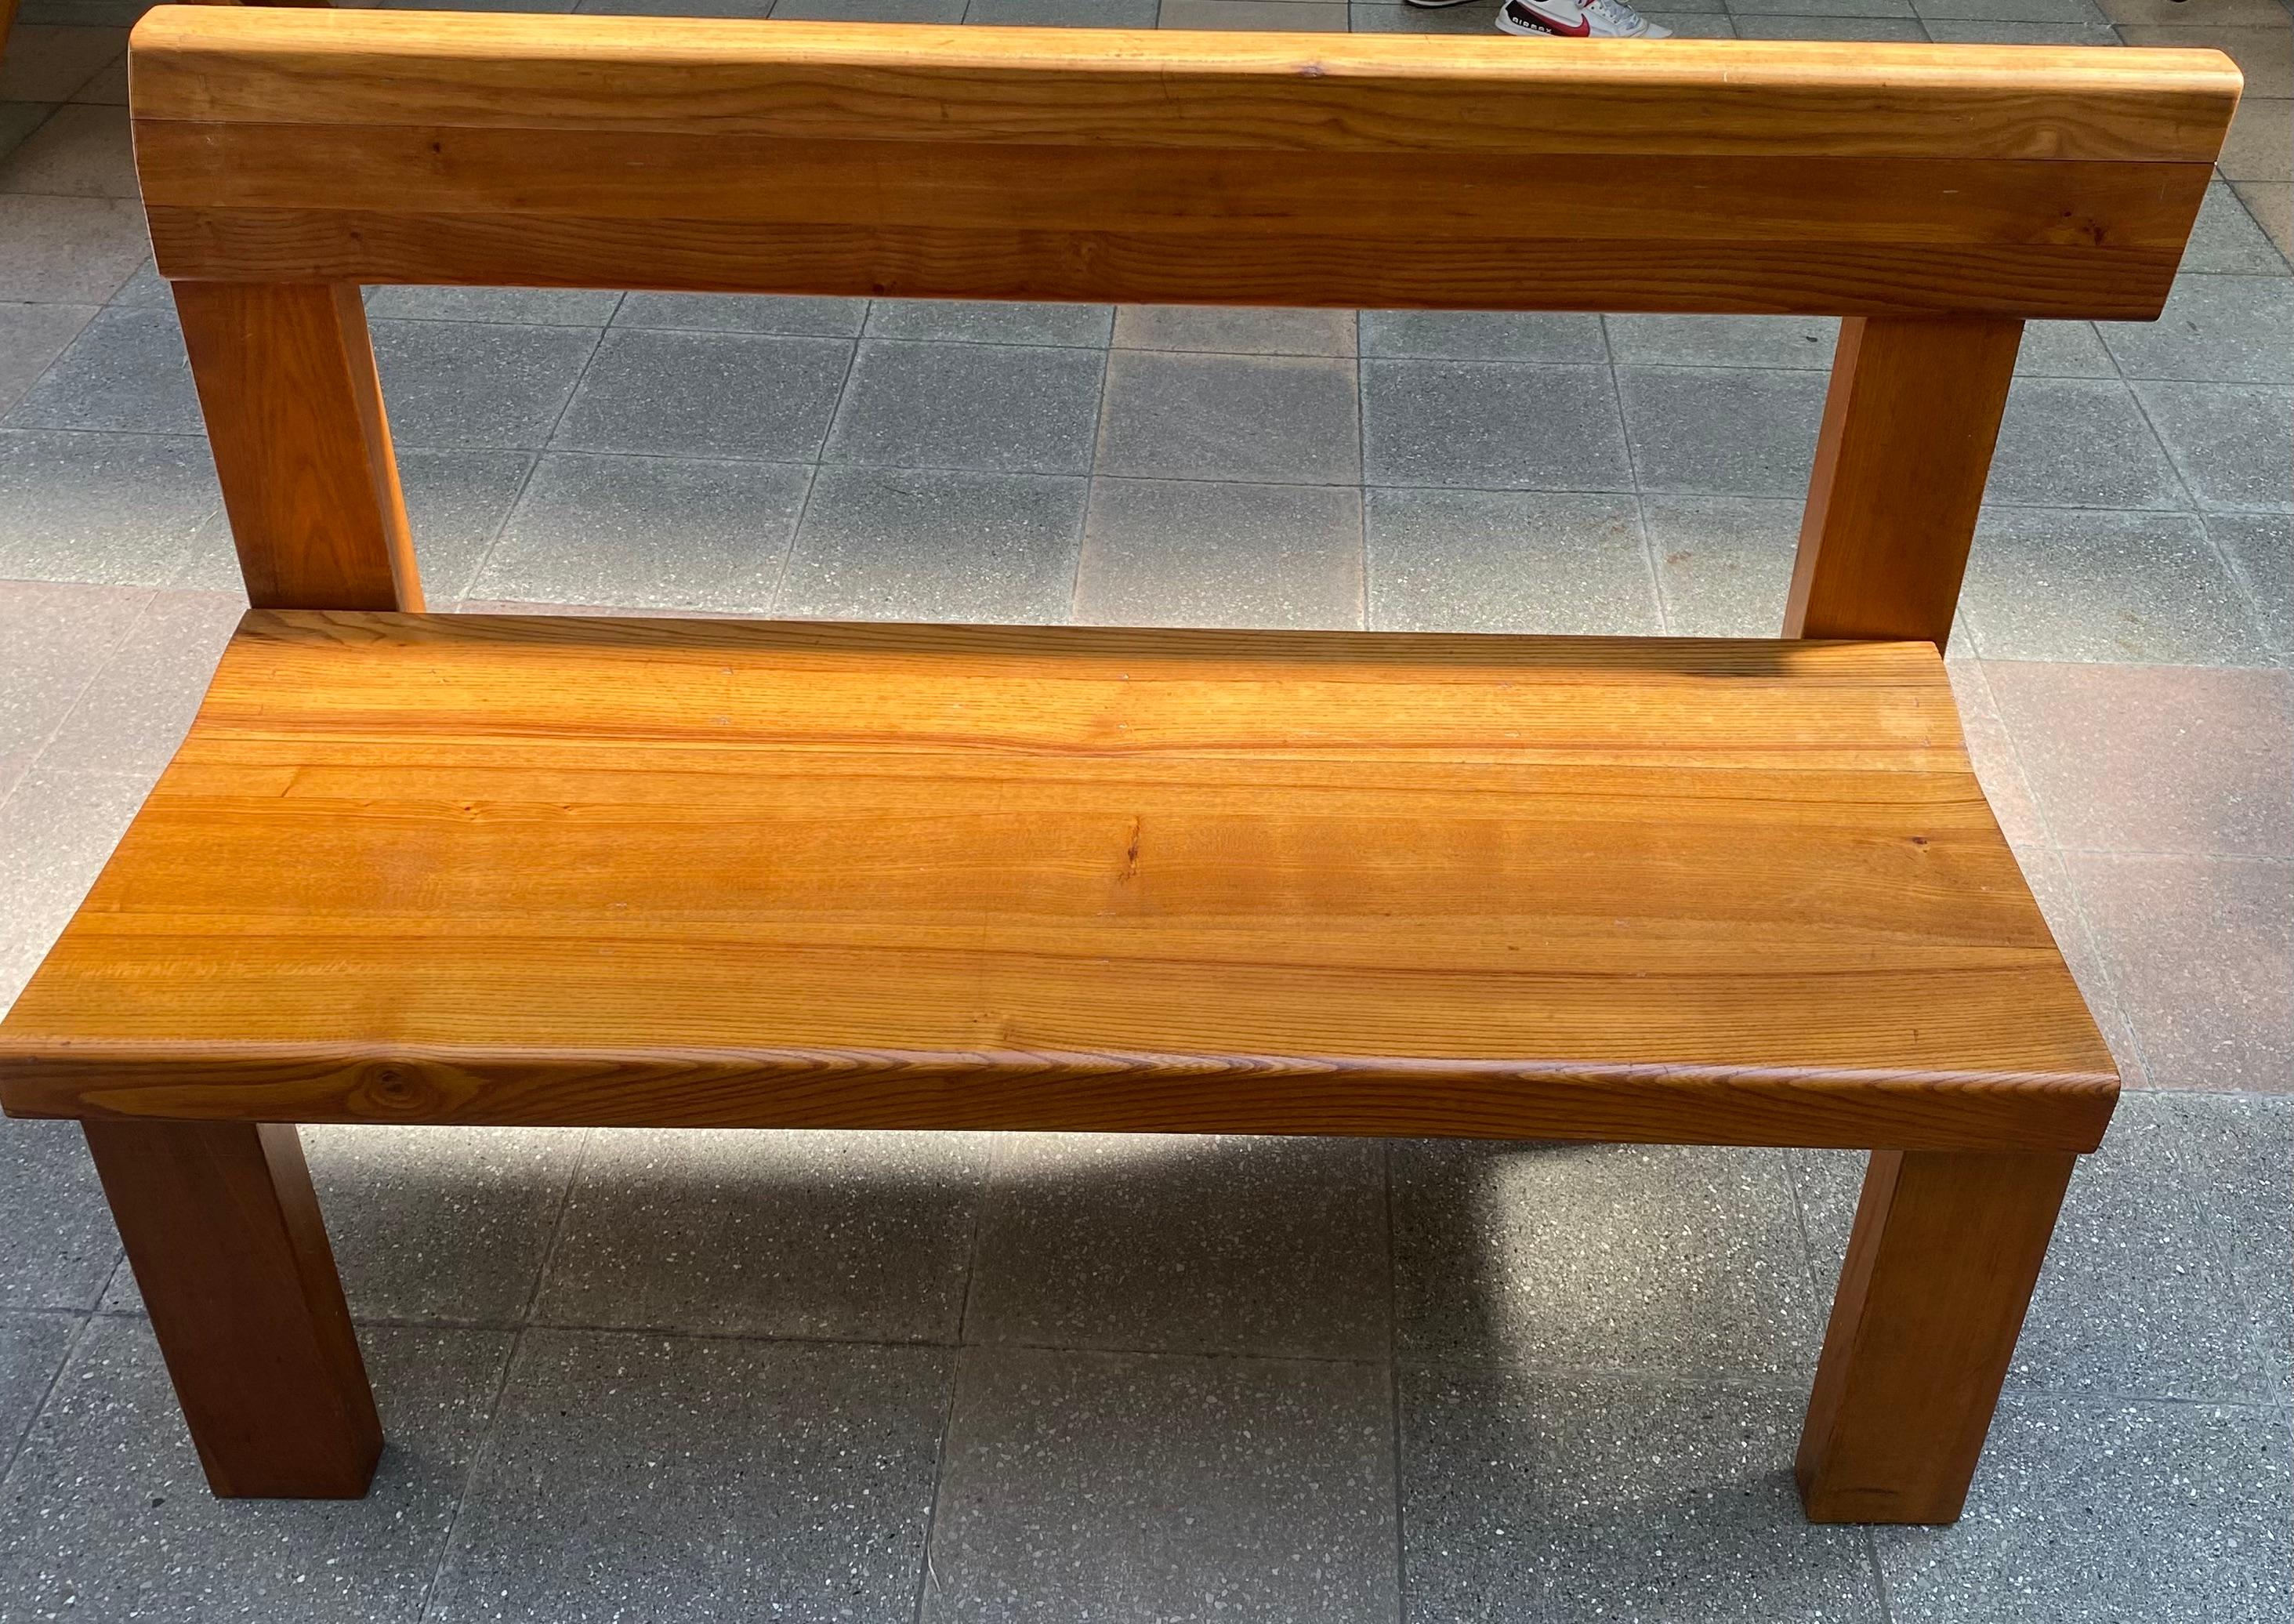 - Bench by Pierre Chapo
Small model S35
Dimensions : W 122 x H 84 x D 48 cm
Solid elm
1970
Ref : 4422b/4
Price : € 5900.